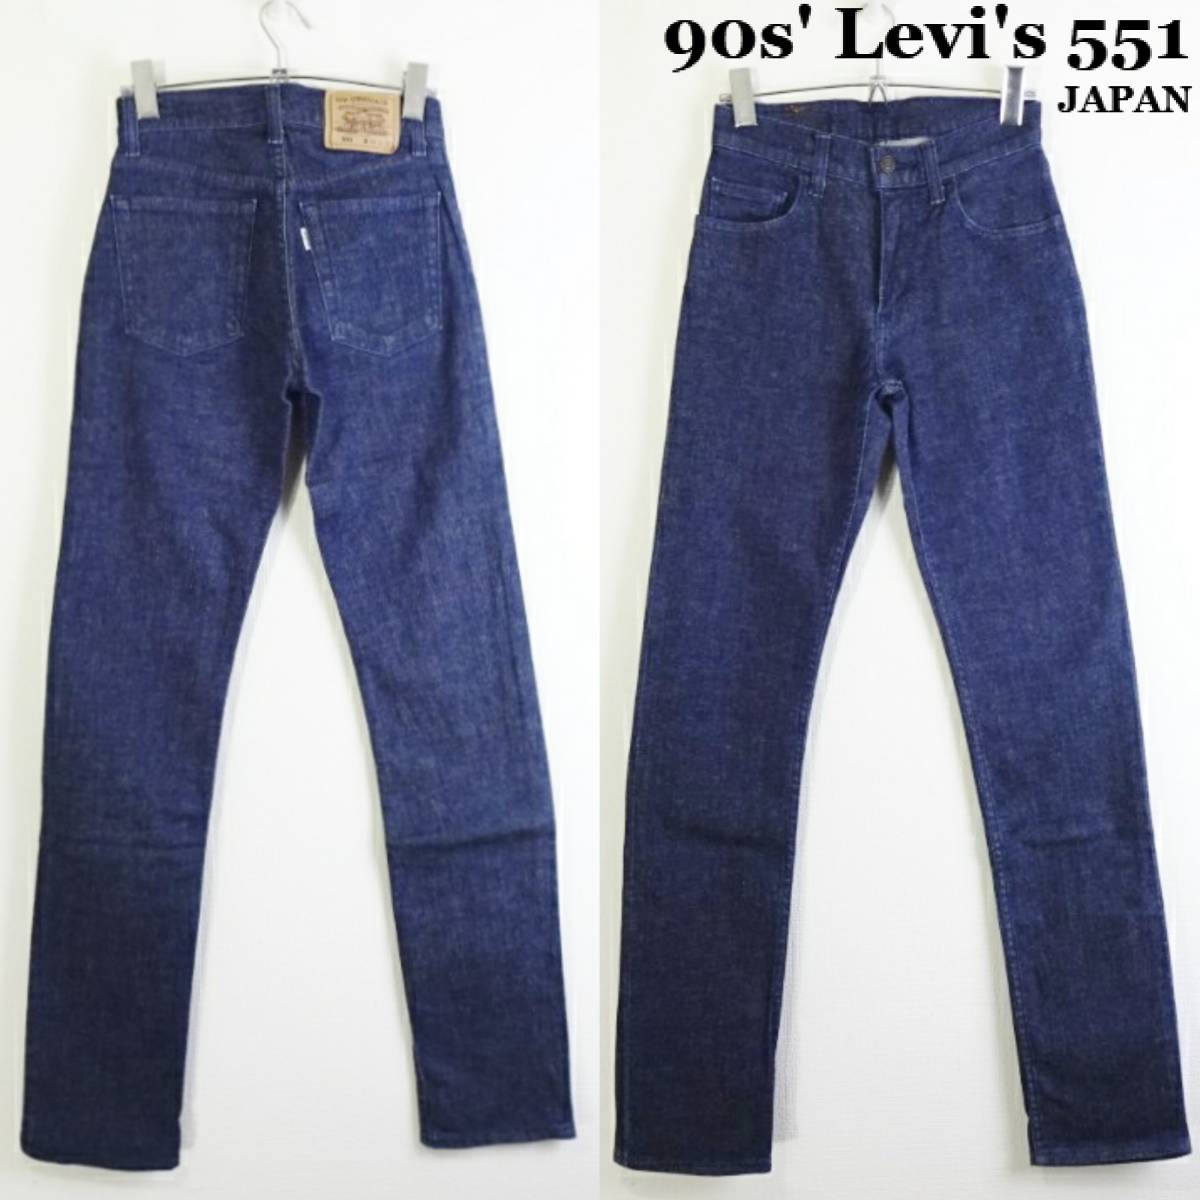  prompt decision * carriage less * superior article * 90s Levi's 551 W64cm stretch skinny tapered Denim navy made in Japan Sz.24 Levi\'s D161